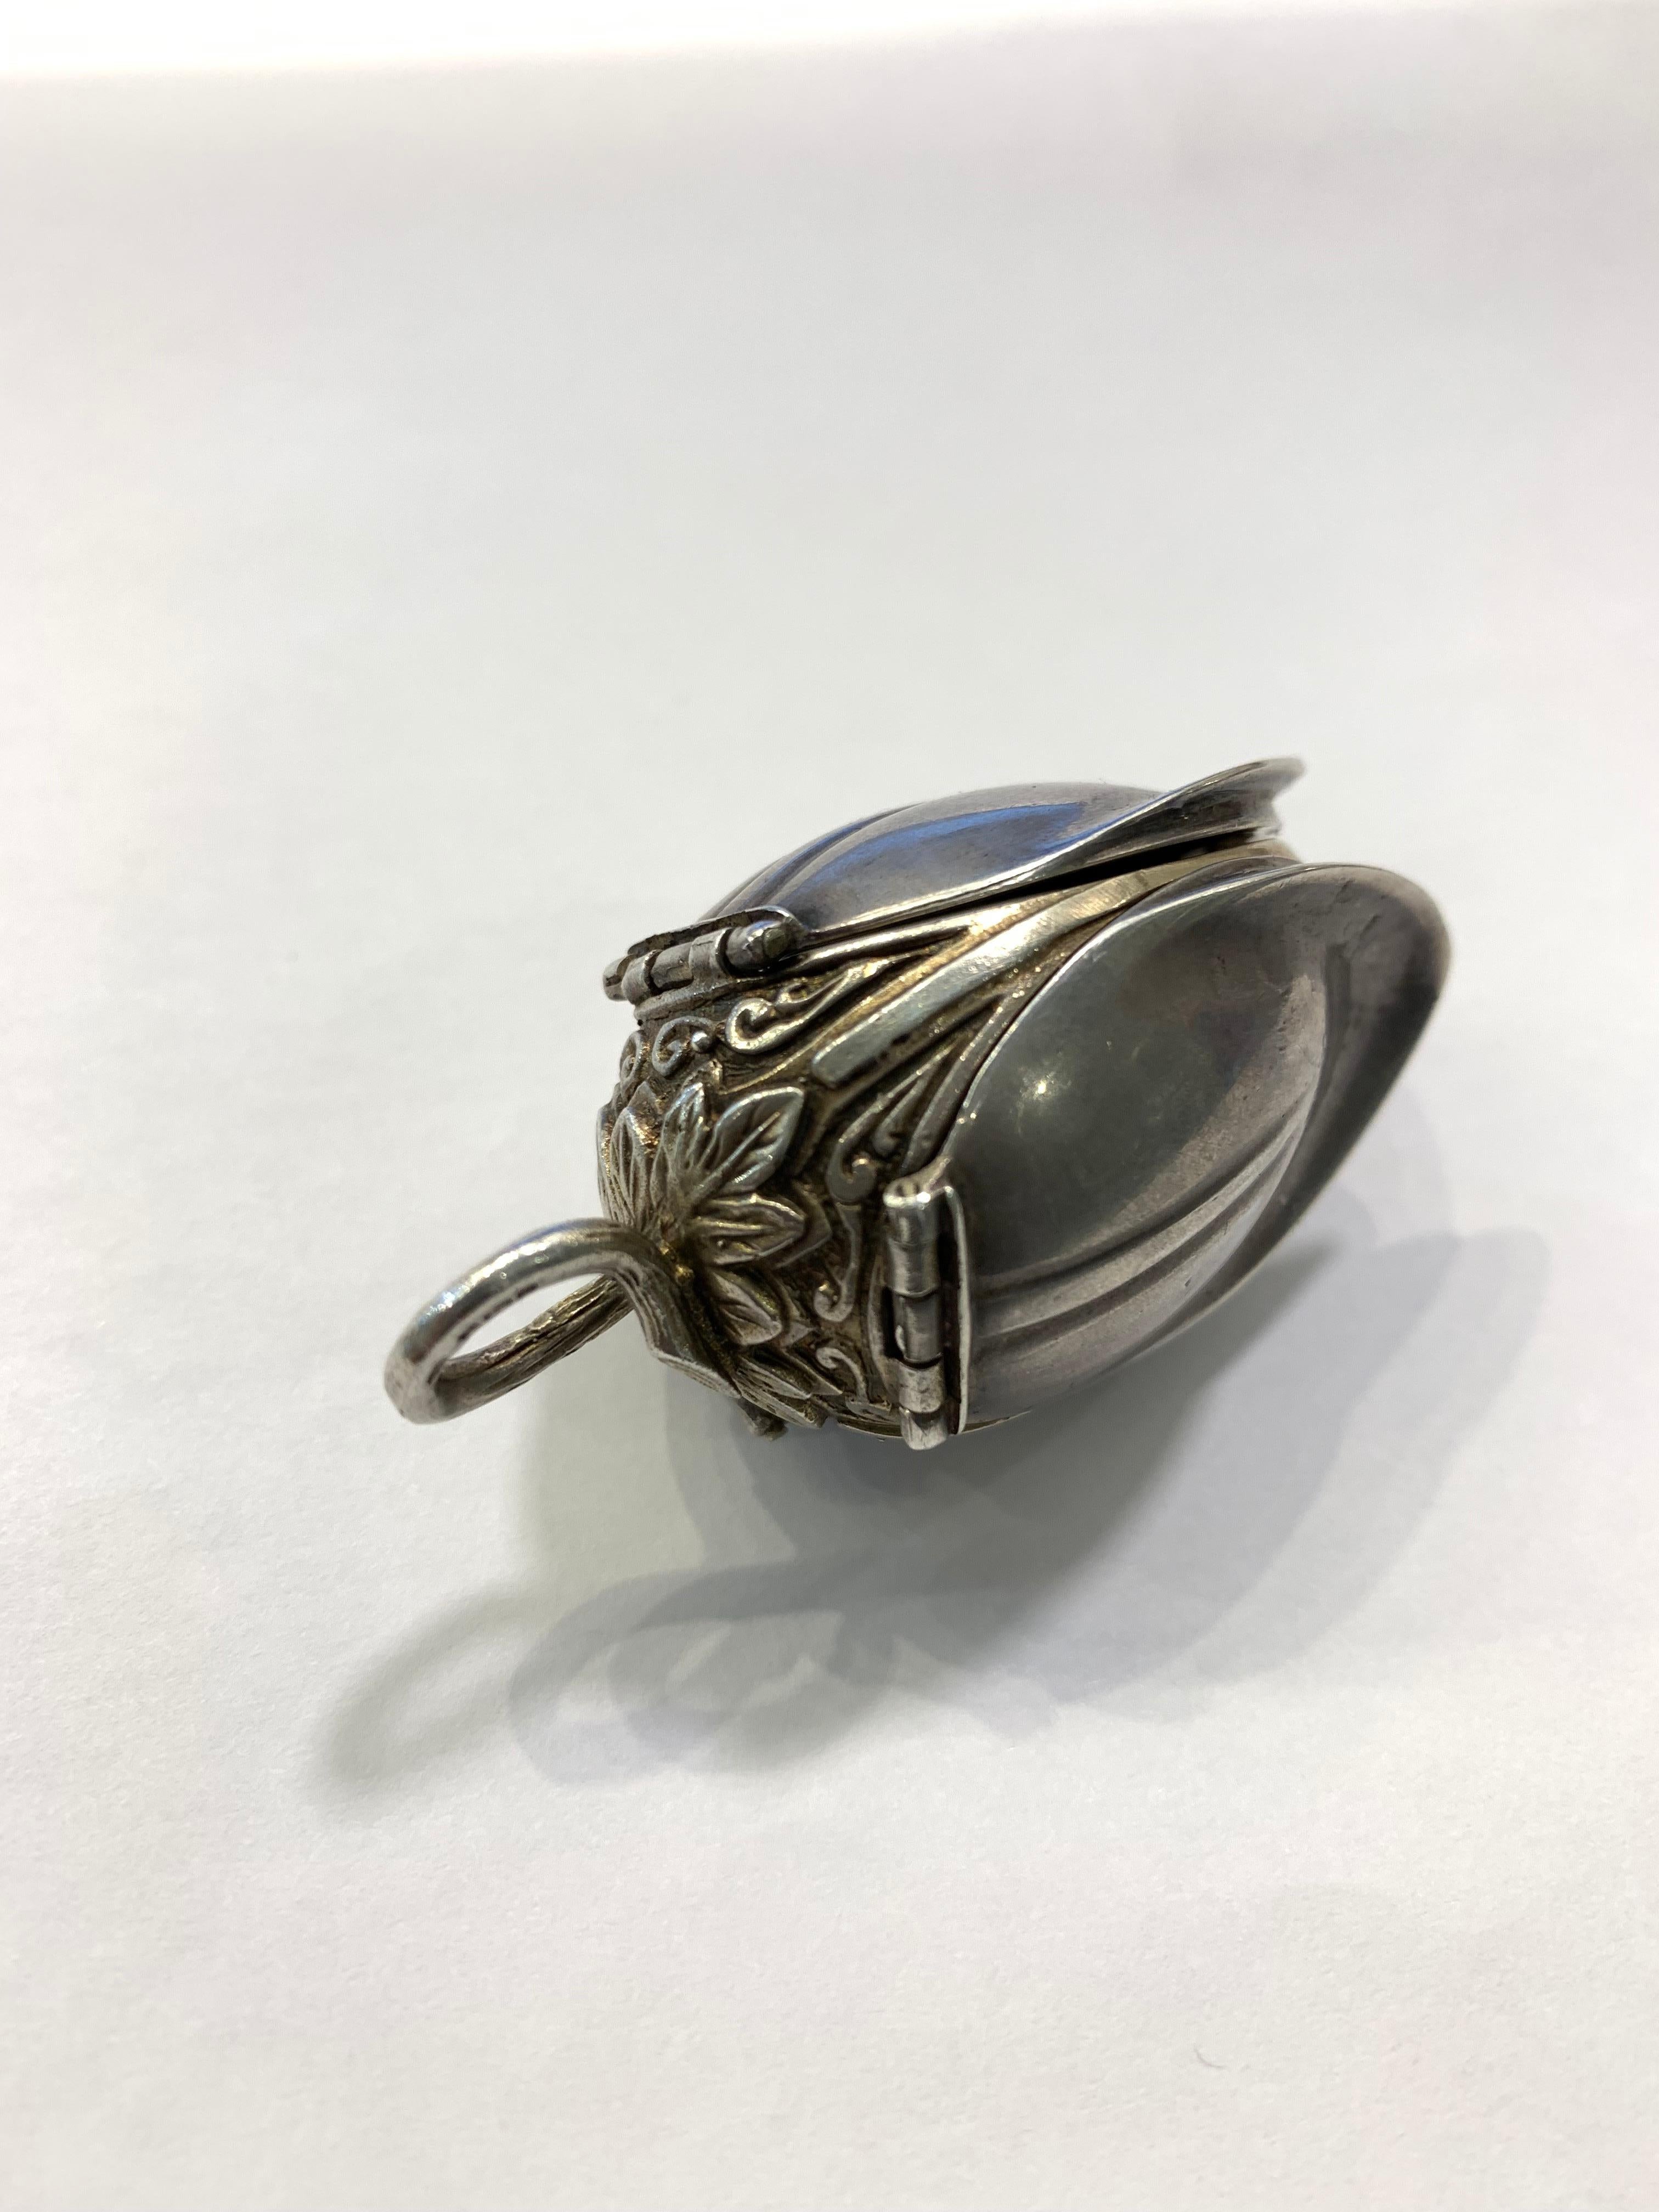 A beautifully crafted English silver antique watch locket in the style of a tulip flower bud. This is a rare stunning piece of jewelry that would make a great addition to any collection. Each 'petal' opens up revealing the original bronze watch with